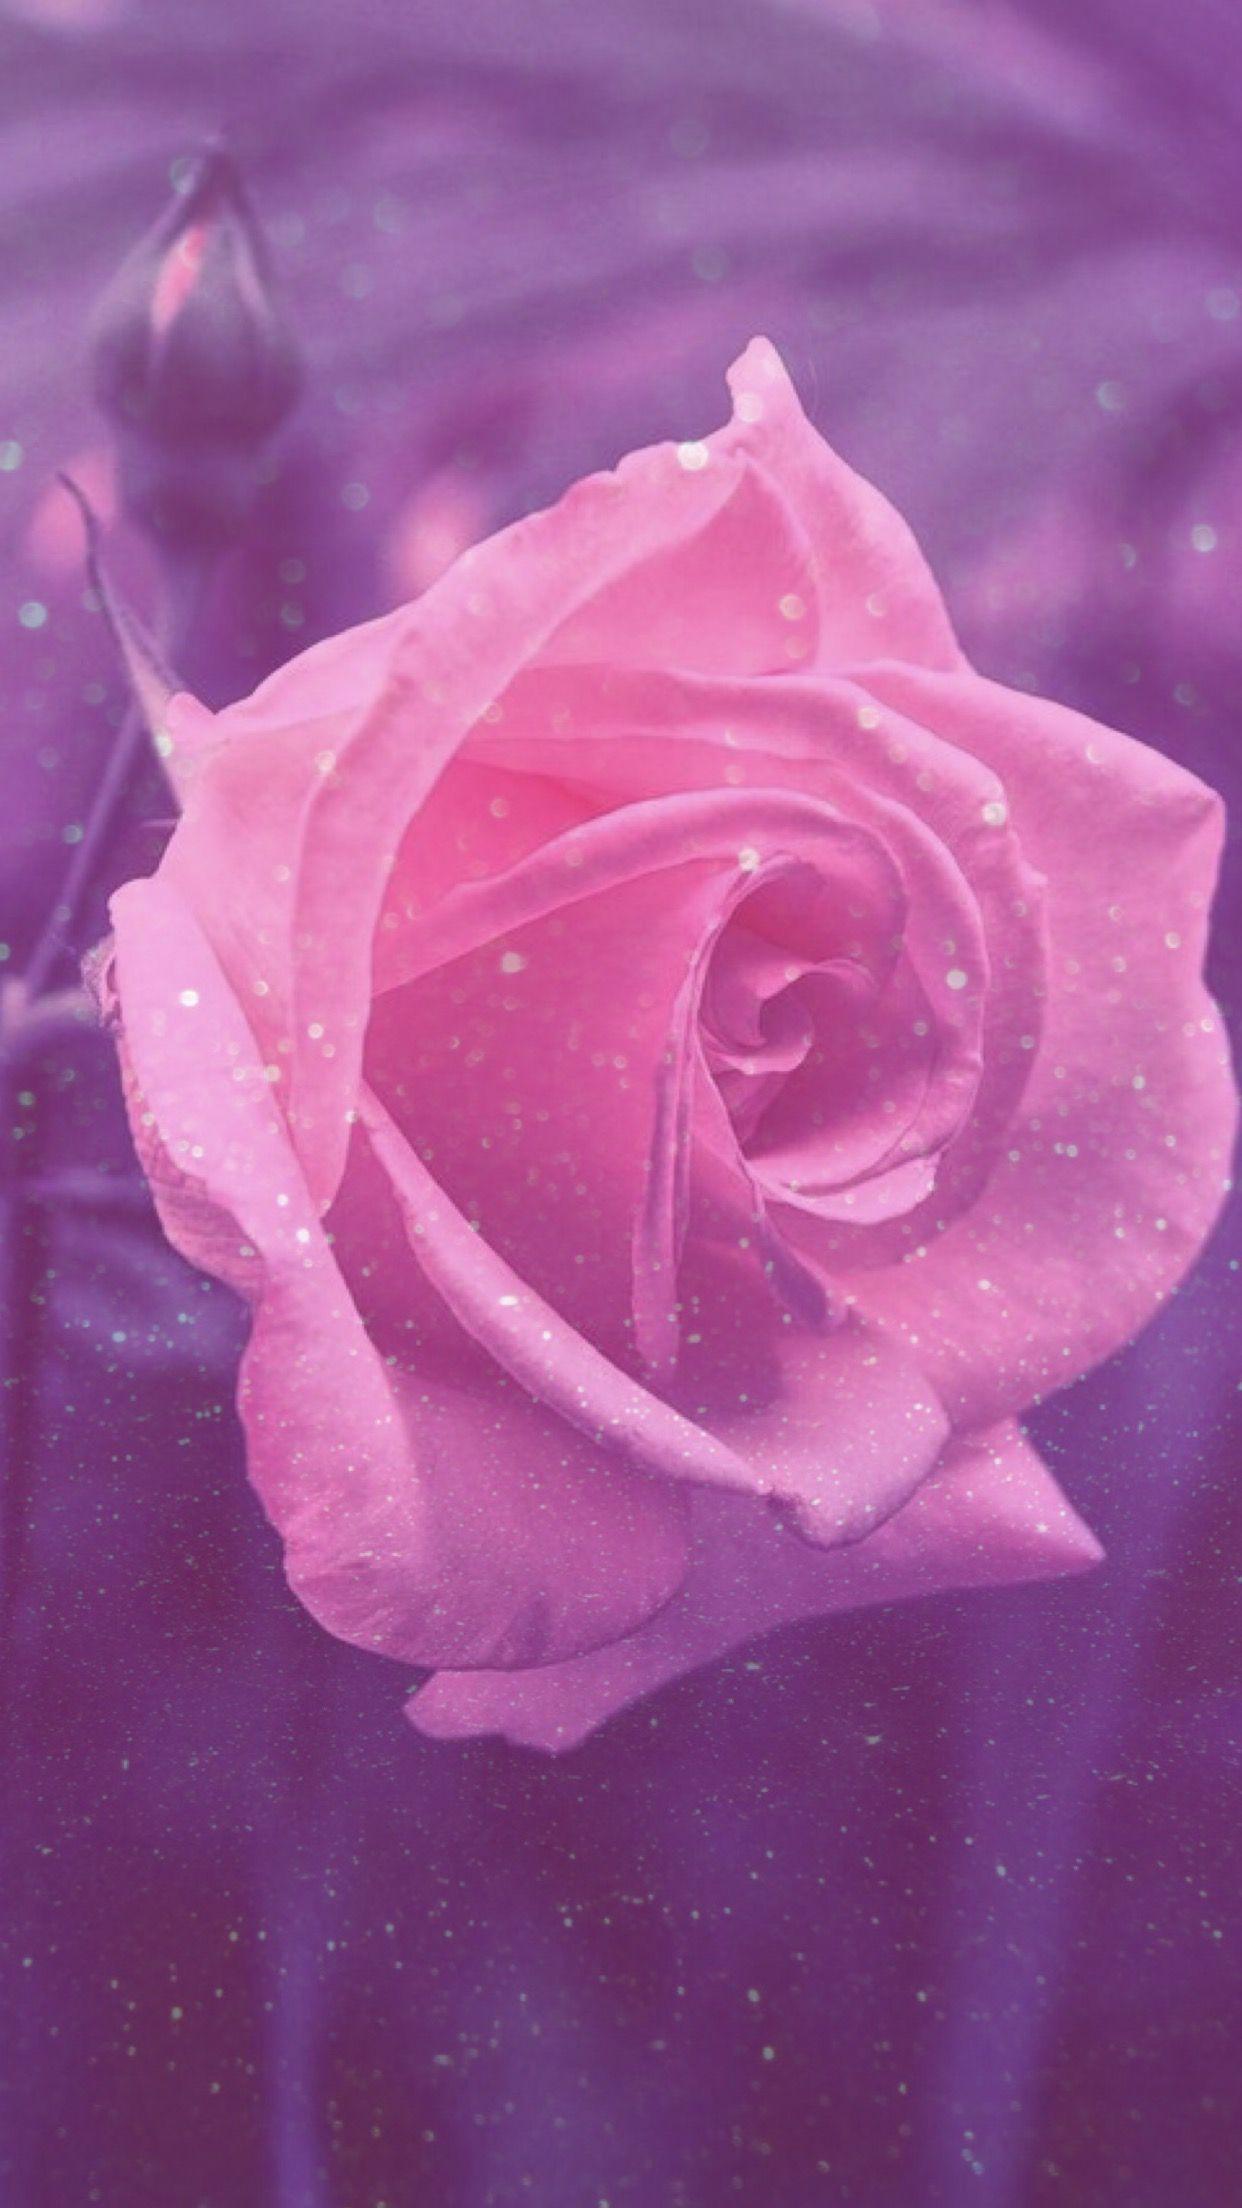 20 Choices pink aesthetic wallpaper rose You Can Save It At No Cost ...